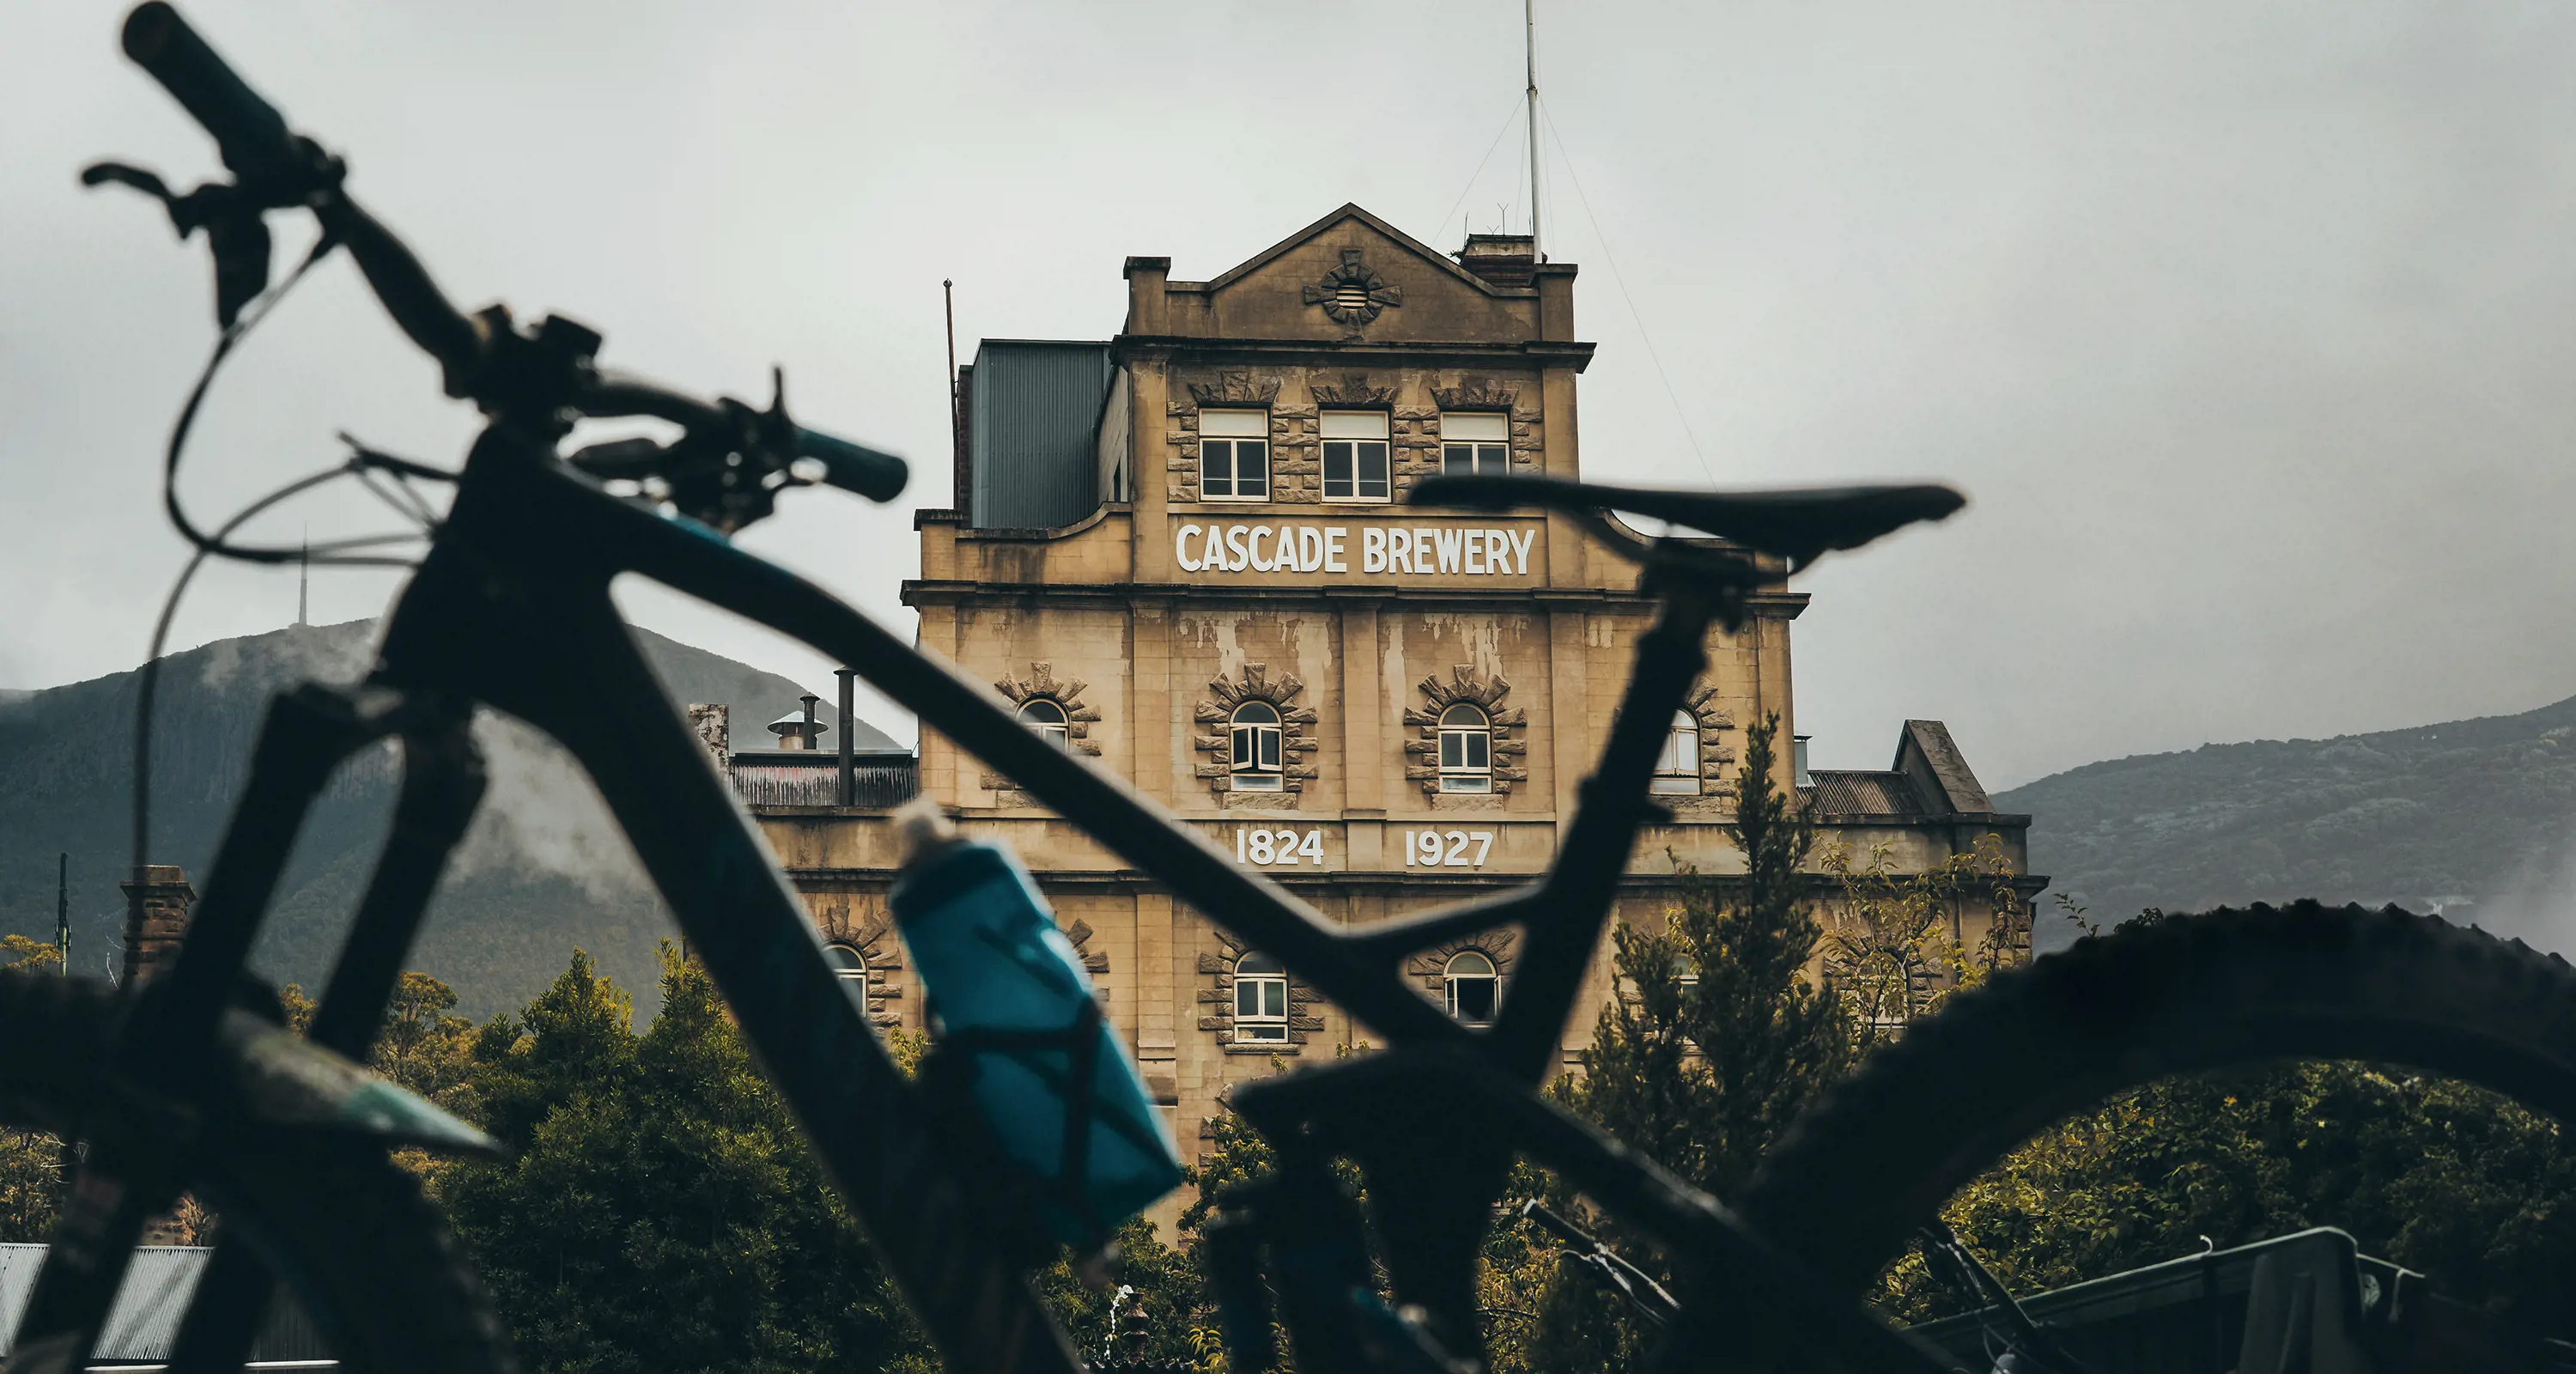 A mountain bike in the foreground of a photograph of the façade of the Cascade Brewery.